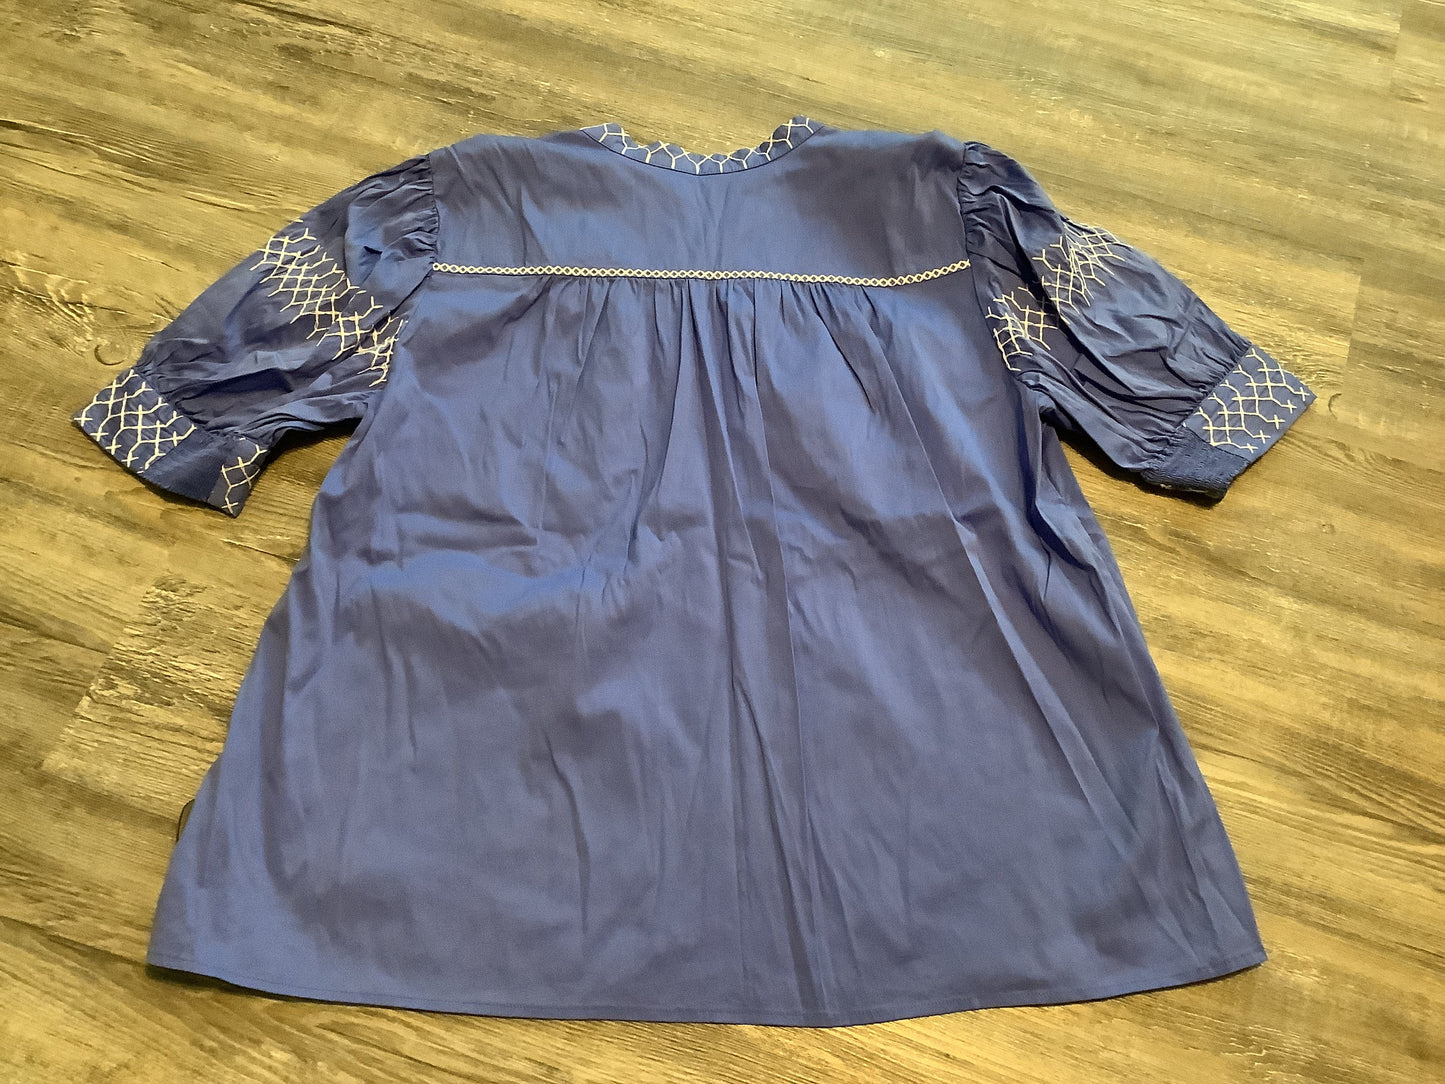 Blue Top Short Sleeve Chicos, Size Xl